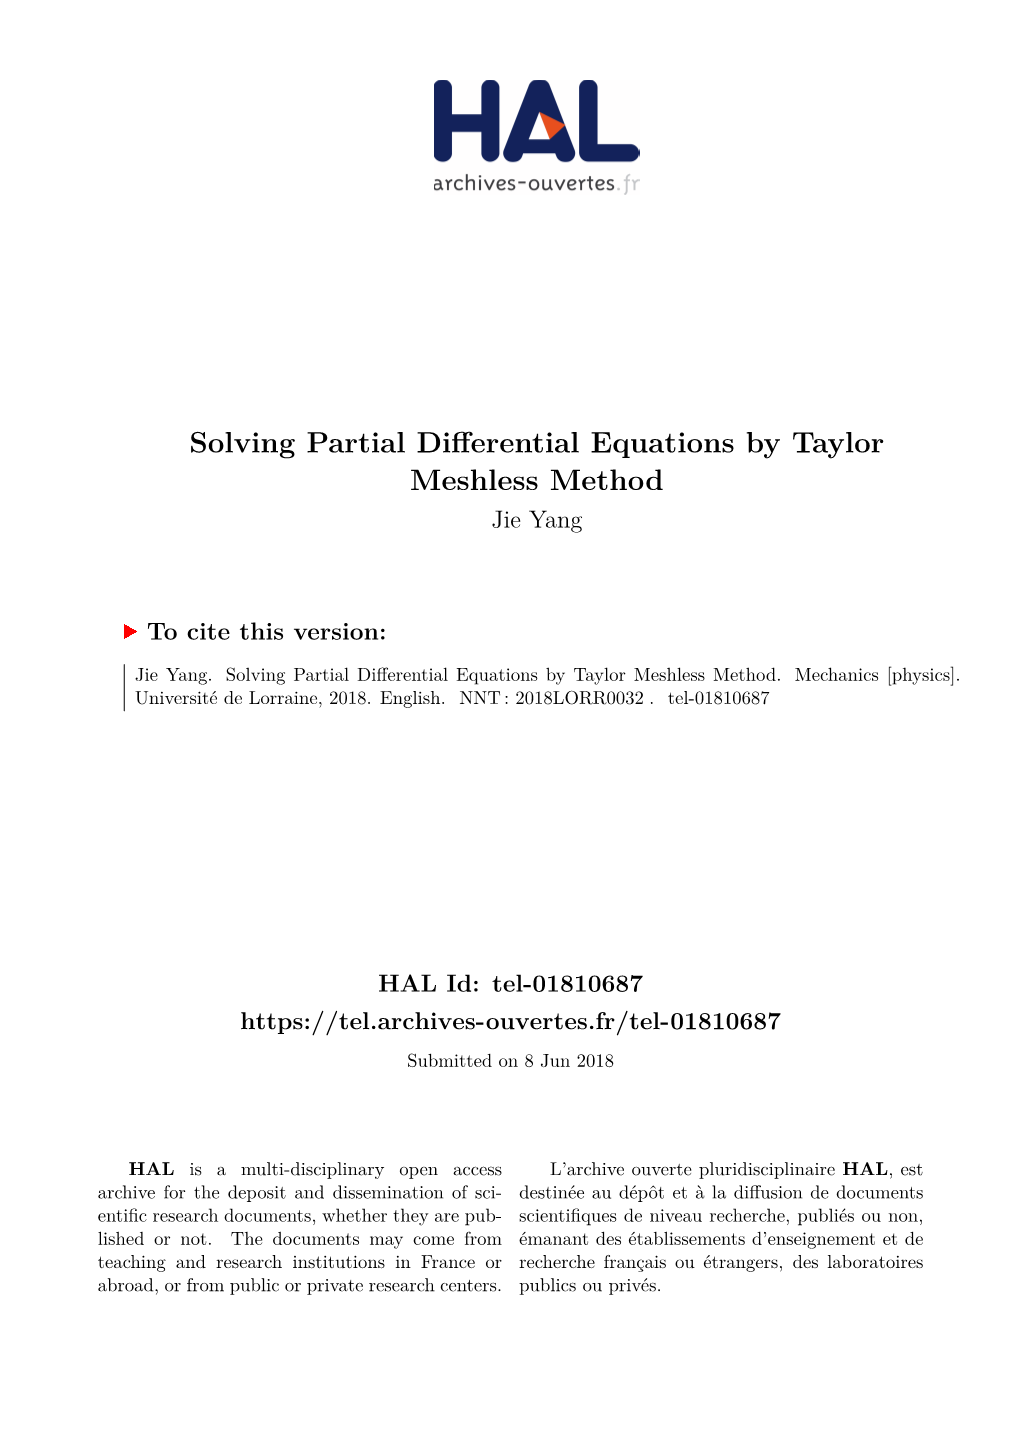 Solving Partial Differential Equations by Taylor Meshless Method Jie Yang